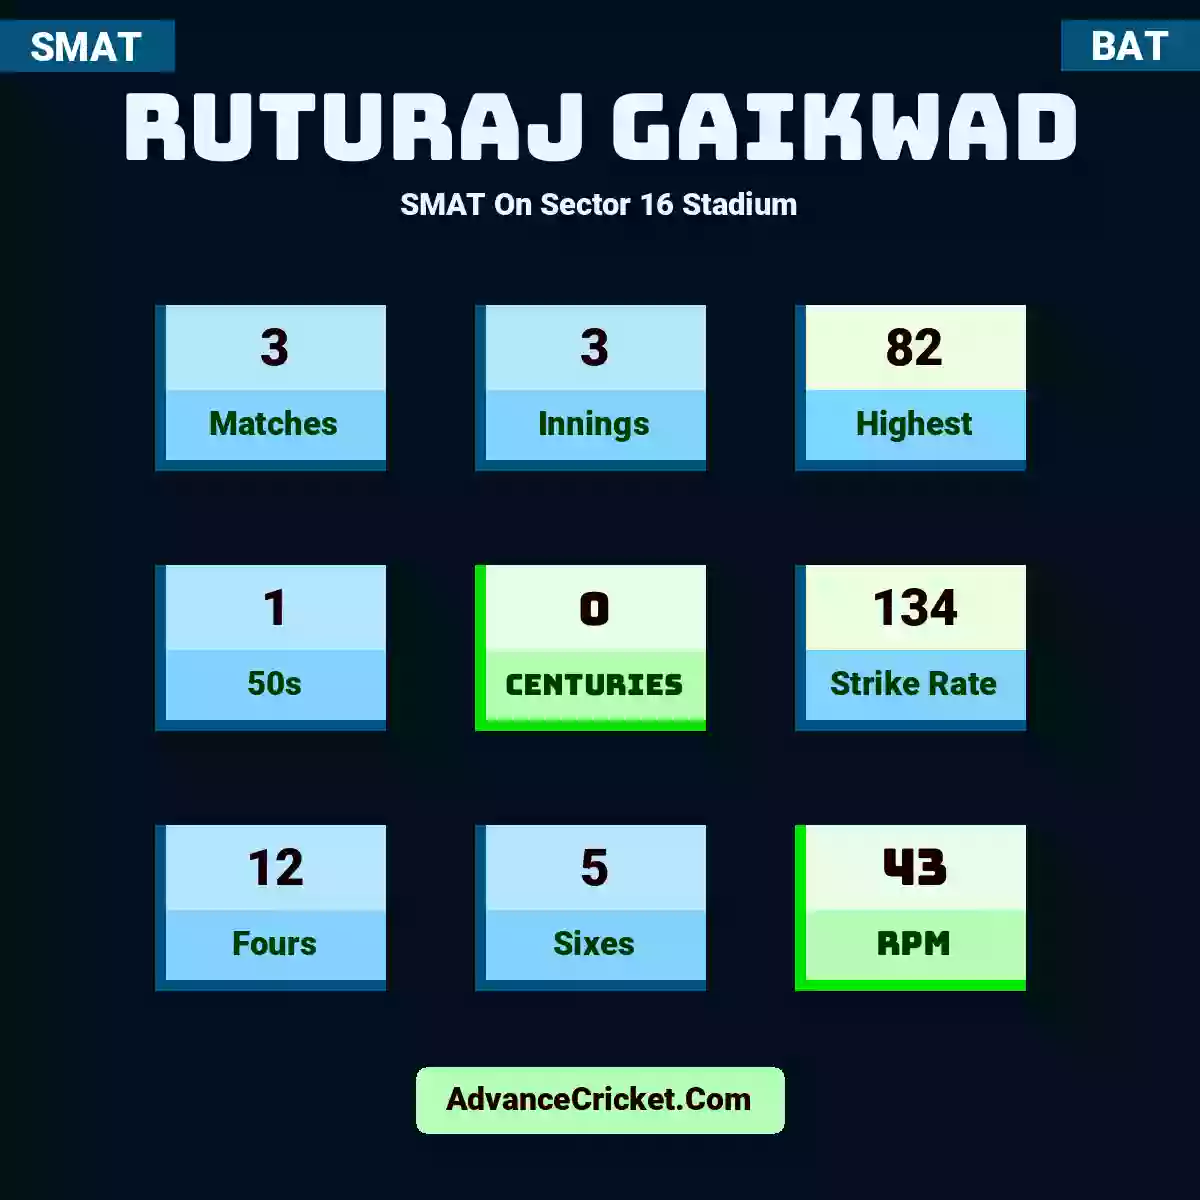 Ruturaj Gaikwad SMAT  On Sector 16 Stadium, Ruturaj Gaikwad played 3 matches, scored 82 runs as highest, 1 half-centuries, and 0 centuries, with a strike rate of 134. R.Gaikwad hit 12 fours and 5 sixes, with an RPM of 43.